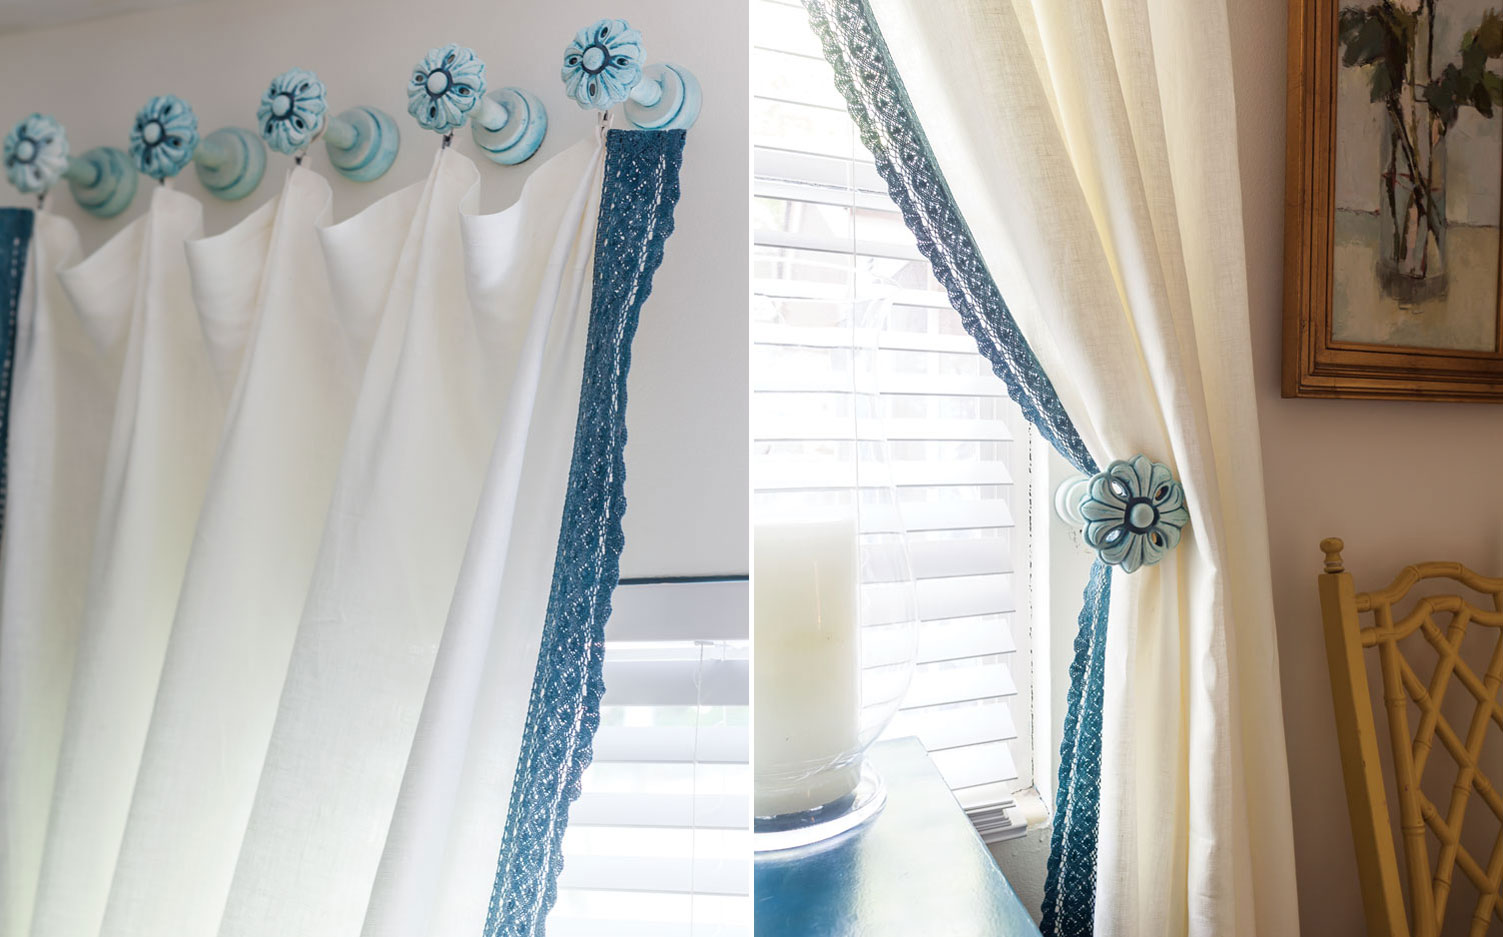 A picture of blue and white lace curtains